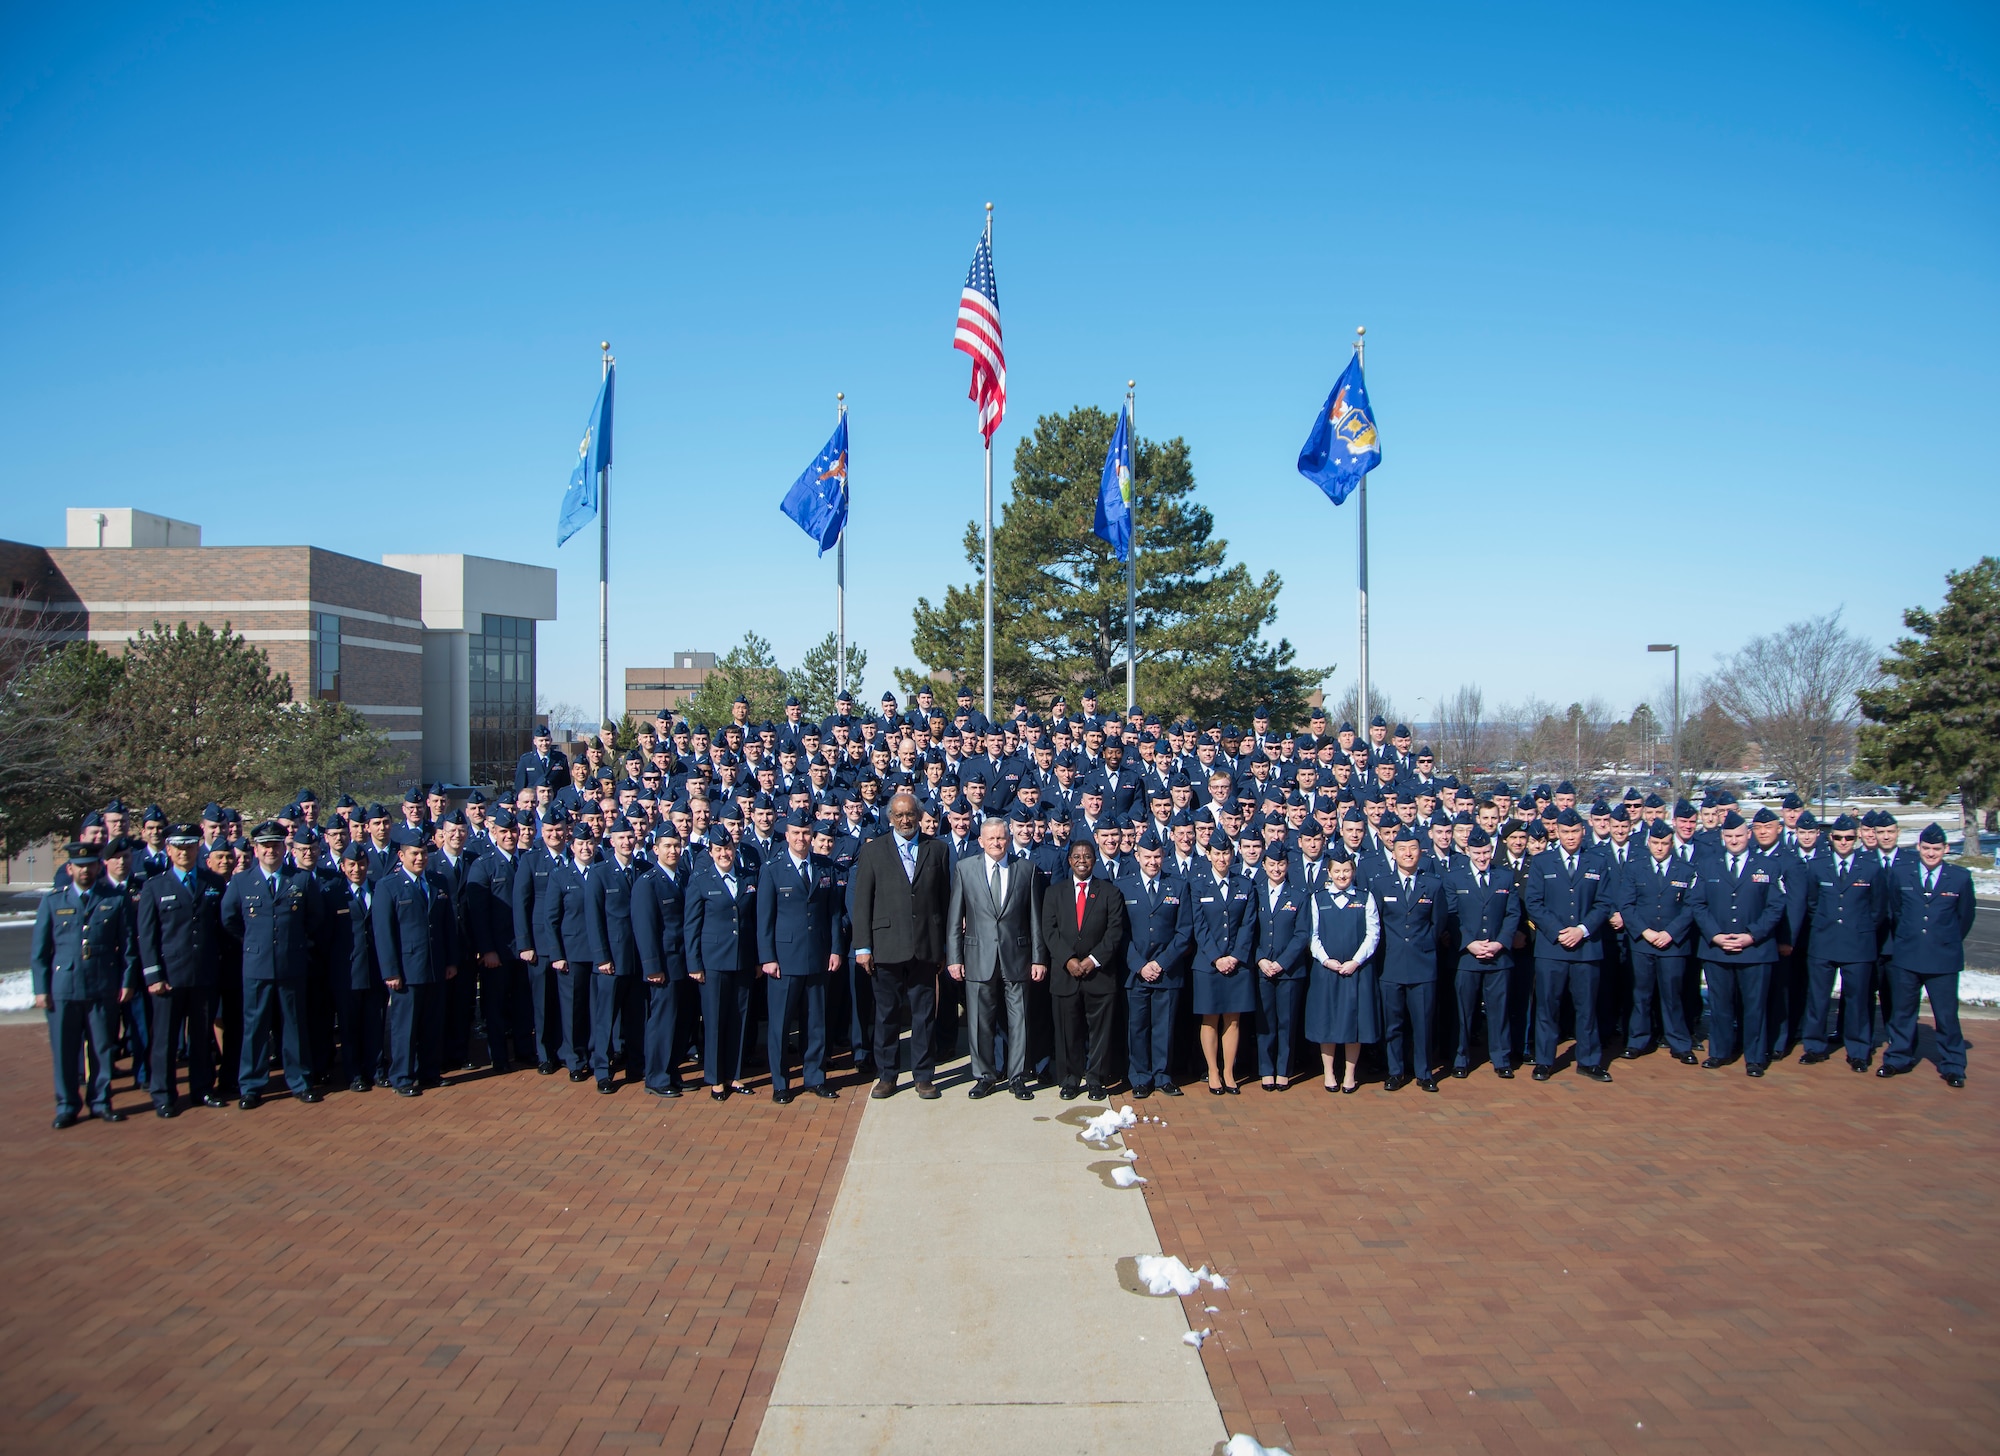 AFIT Senior Leadership including Dr. Todd Stewart, Director and Chancellor, Dr. Sivaguru S. Sritharan, Provost and Academic Dean, and Dr. Adedeji Badiru, Dean, Graduate School of Engineering and Management stand center amongst the AFIT class of 2018. AFIT classes are composed of Air Force, Army, Navy, Marine Corps, international, and civilian students. (U.S. Air Force photo, R.J. Oriez)